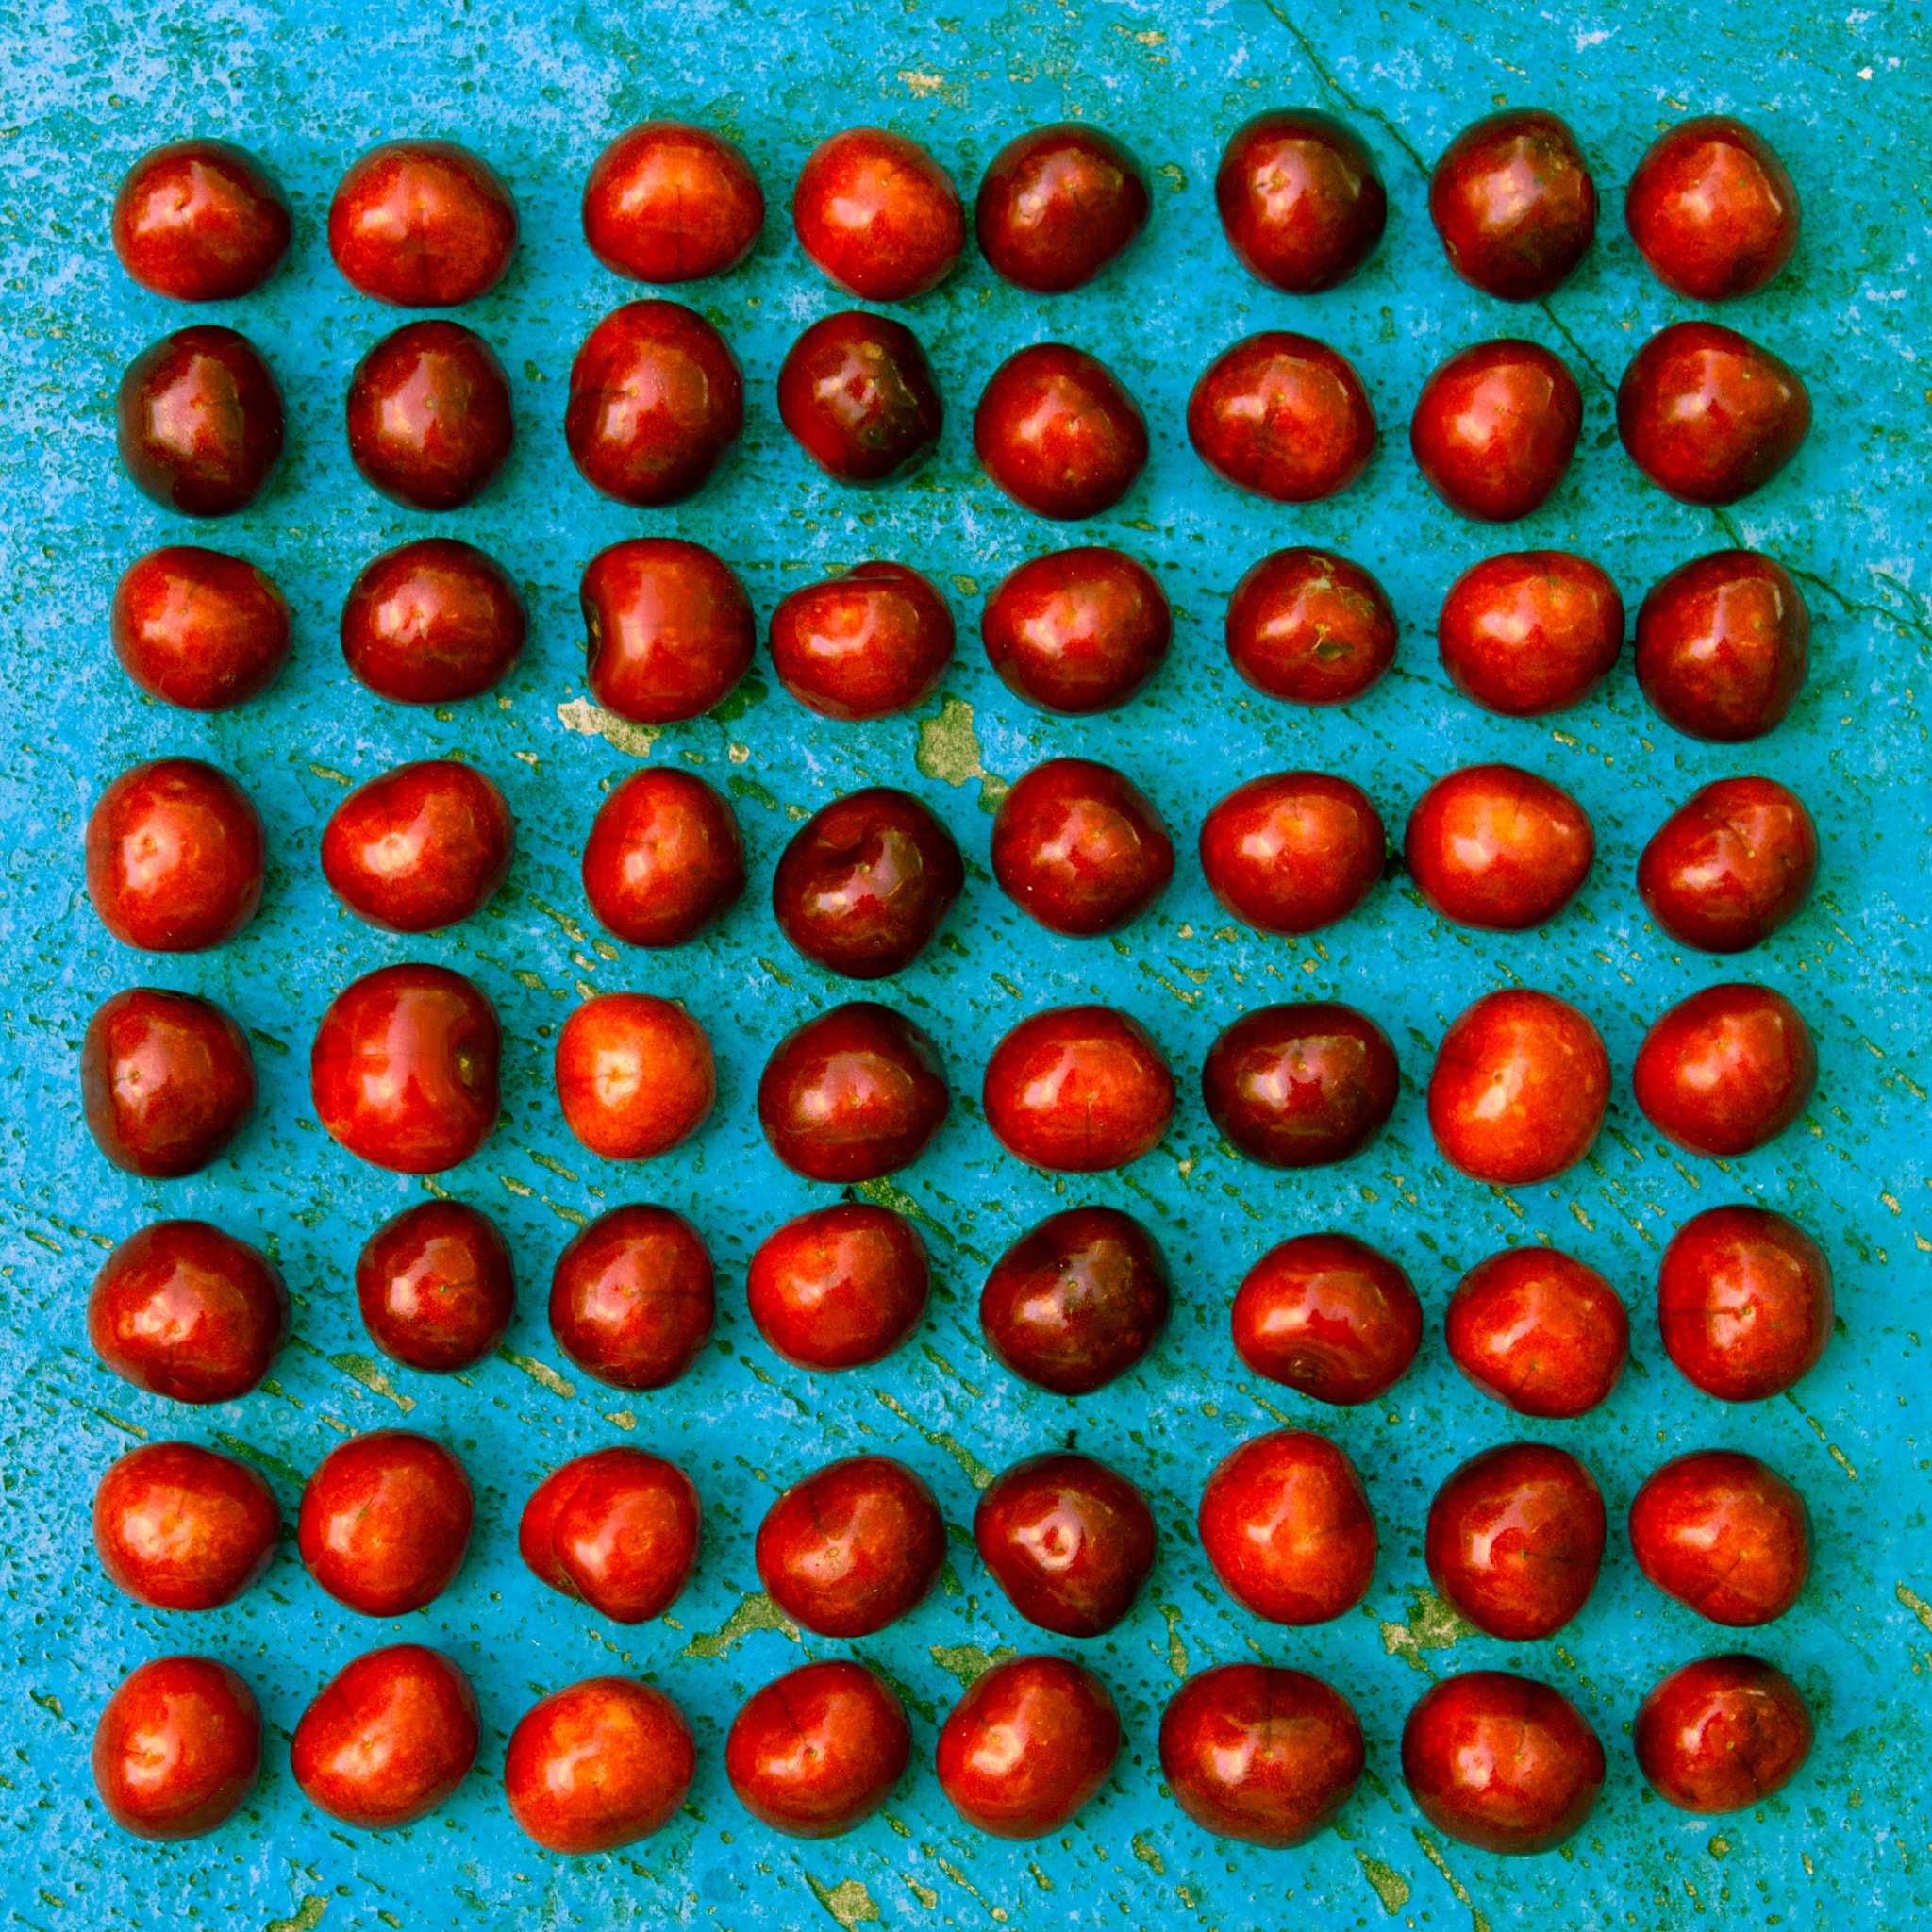 Nikon D2X sample photo. Square arrangement of ripe cherries on blue textrured background photography